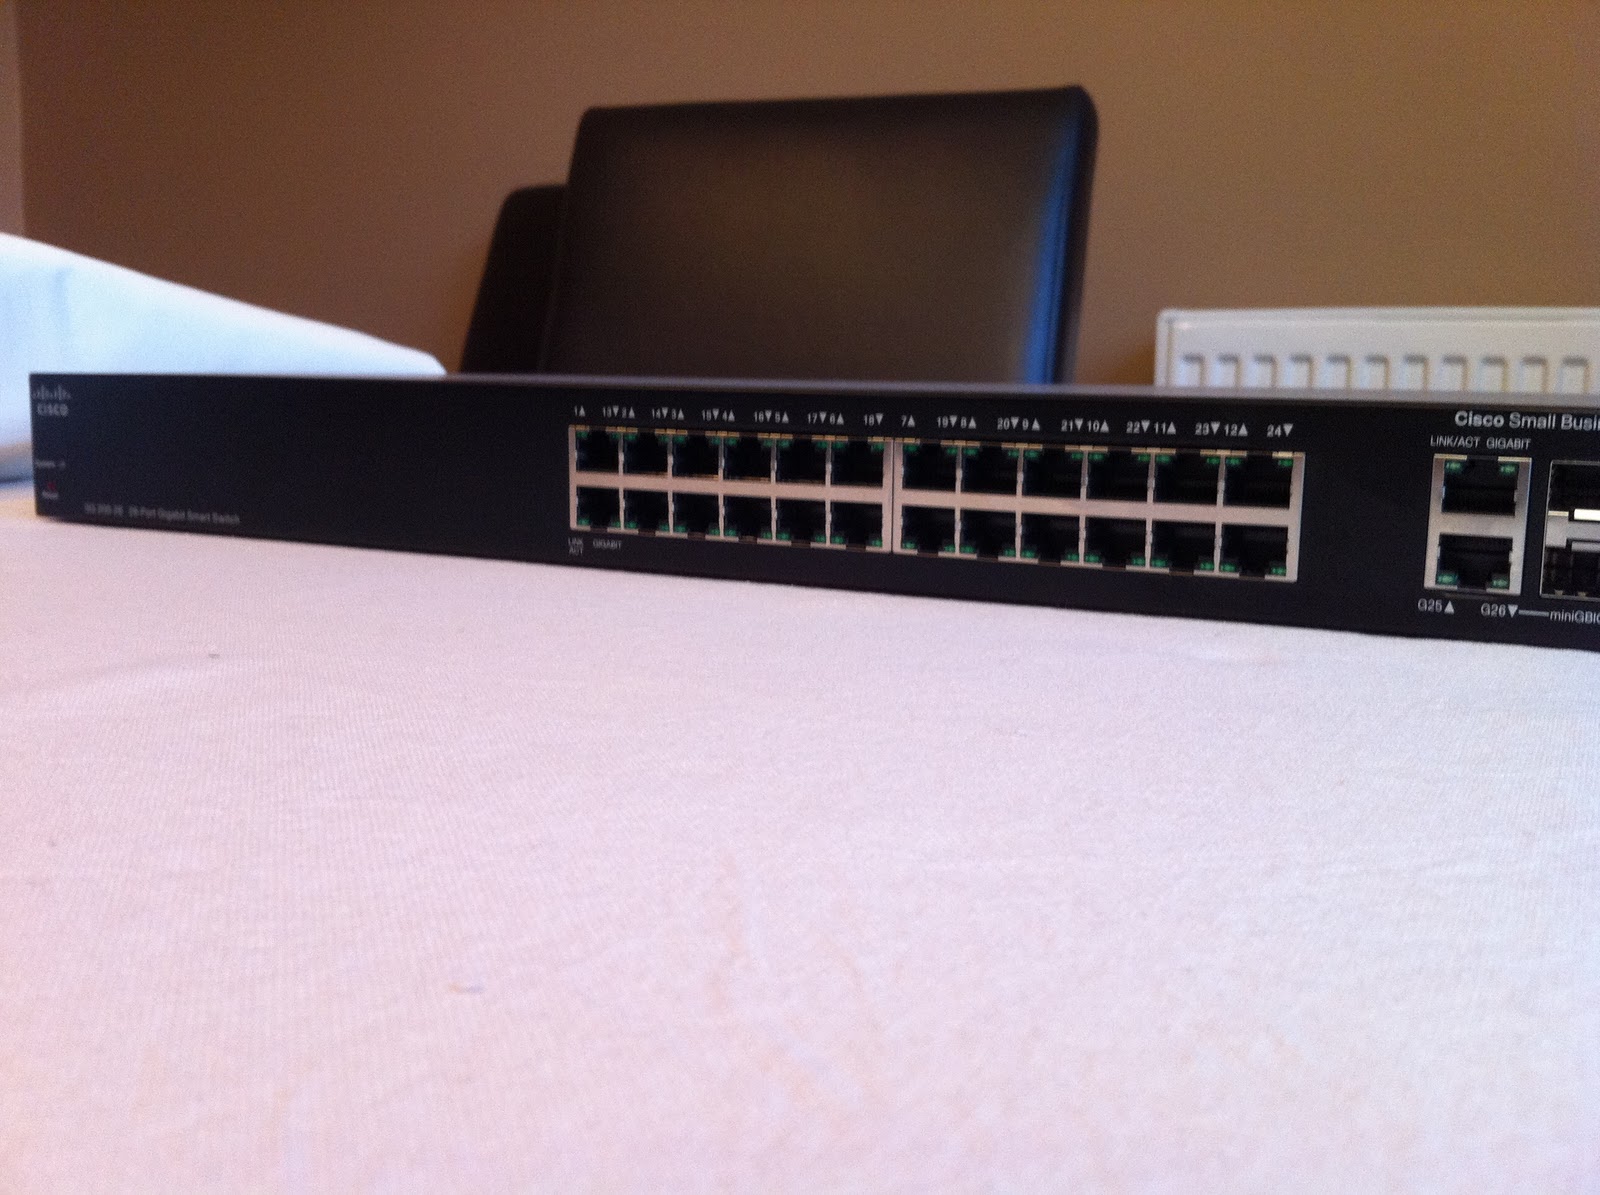 Living on the Cloud: Cisco SG200-26 review